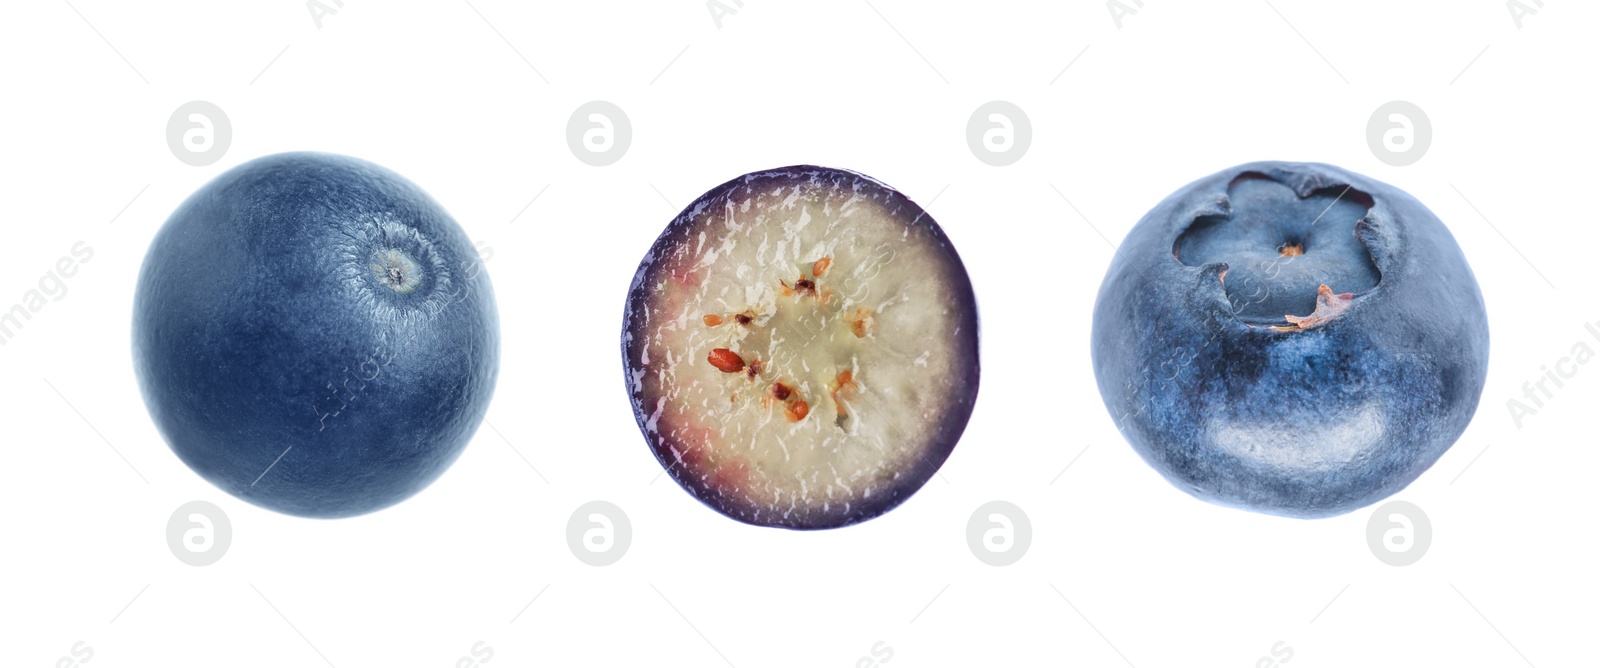 Image of Set of fresh whole and cut blueberries on white background, banner design